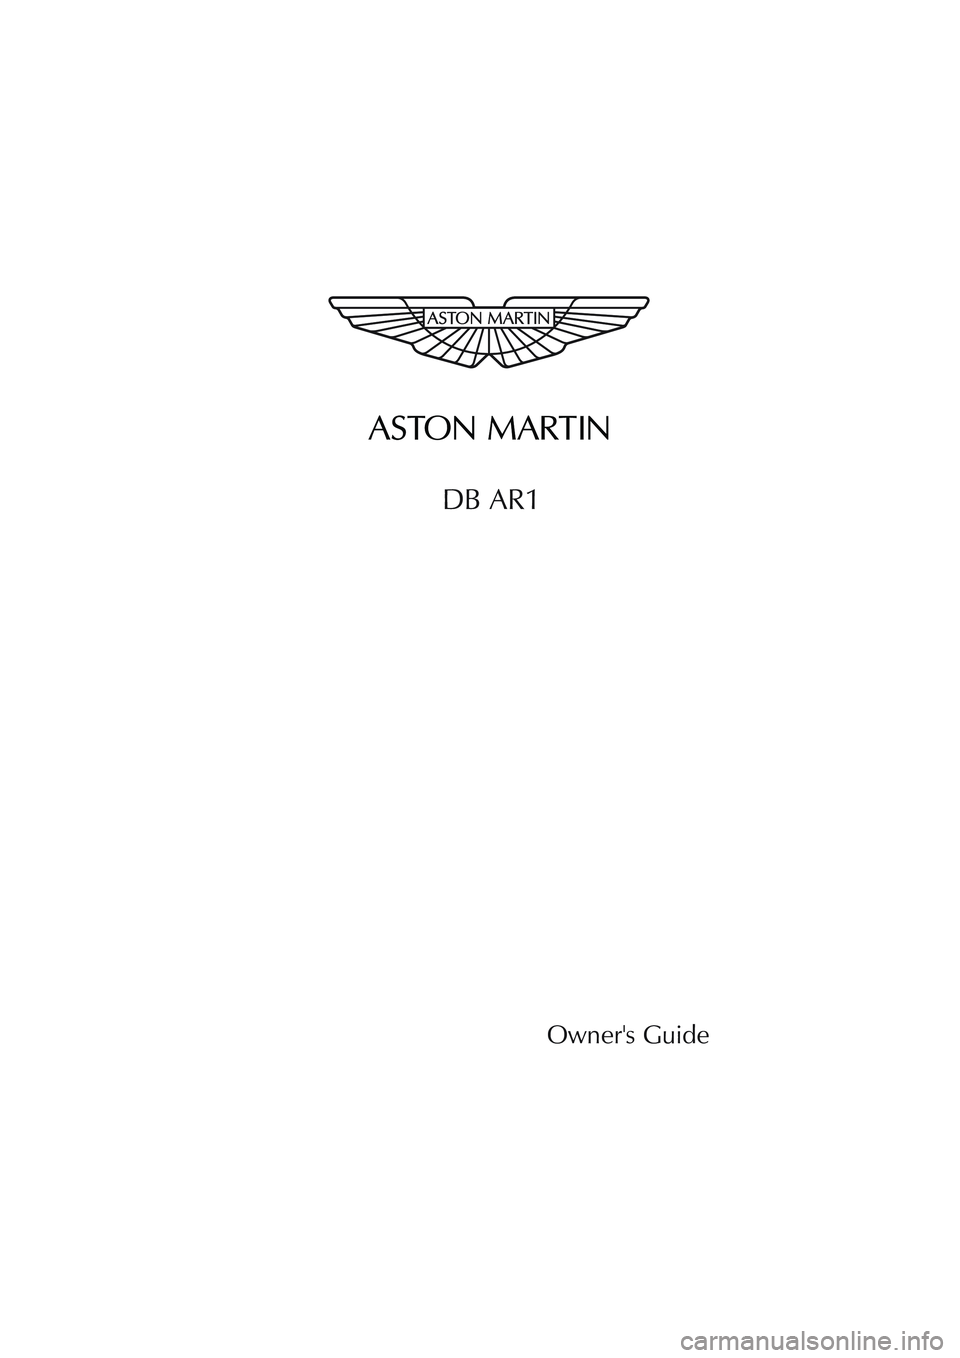 ASTON MARTIN DB AR1 Q 2003  Owners Guide i
DB AR1
Owners Guide 